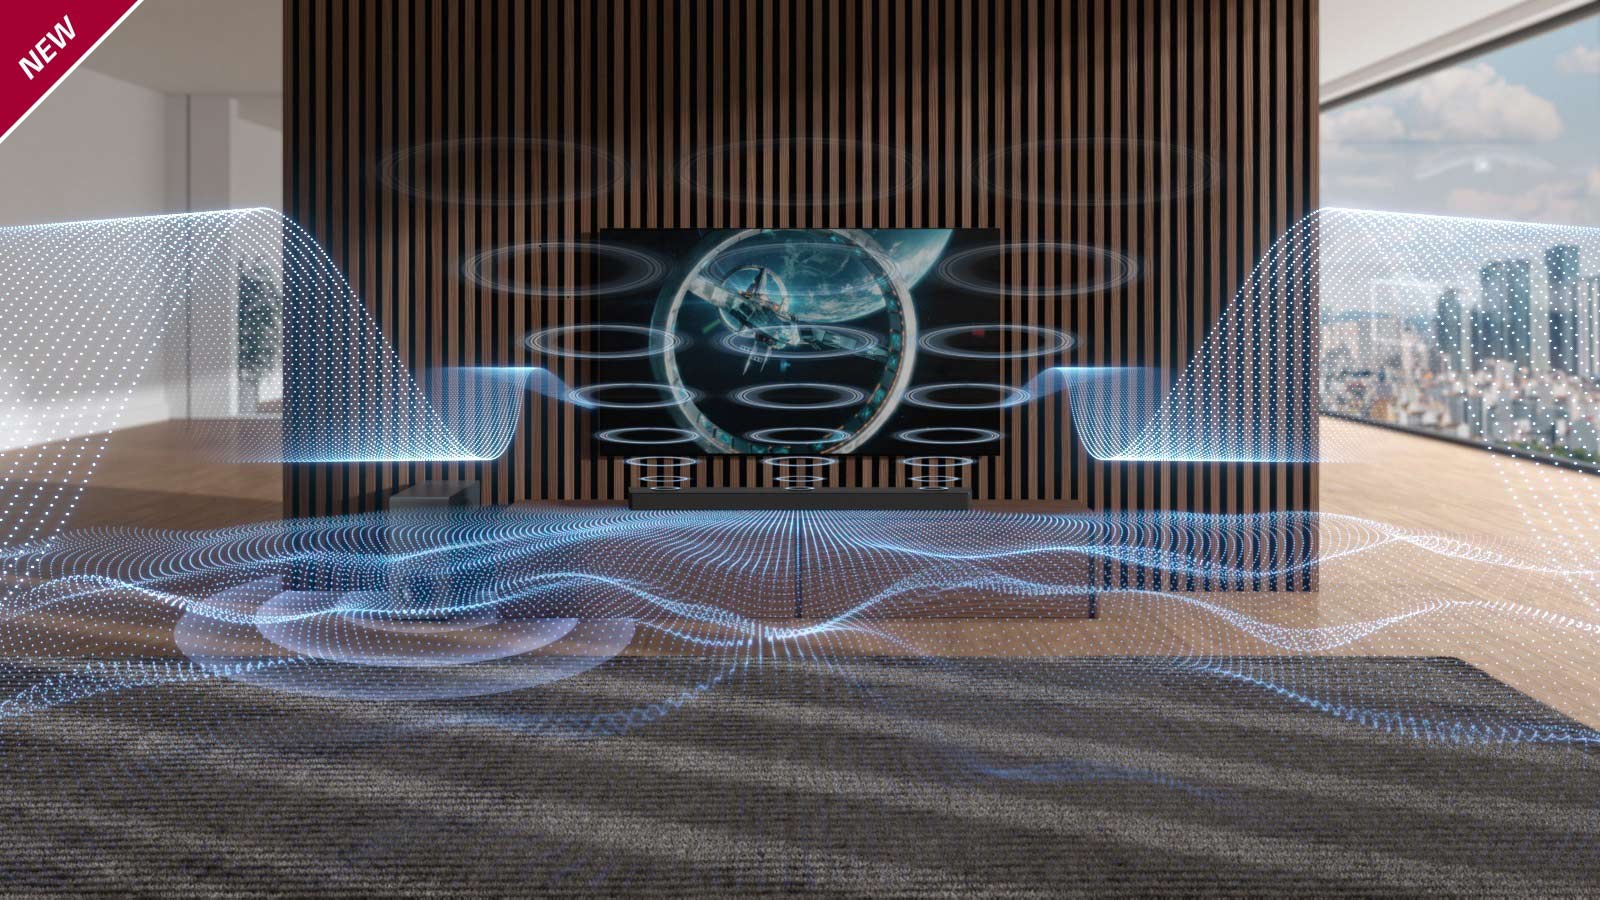 Variously figured blue-colored sound waves are being released from Sound Bar and TV. NEW mark is shown in the top left corner.